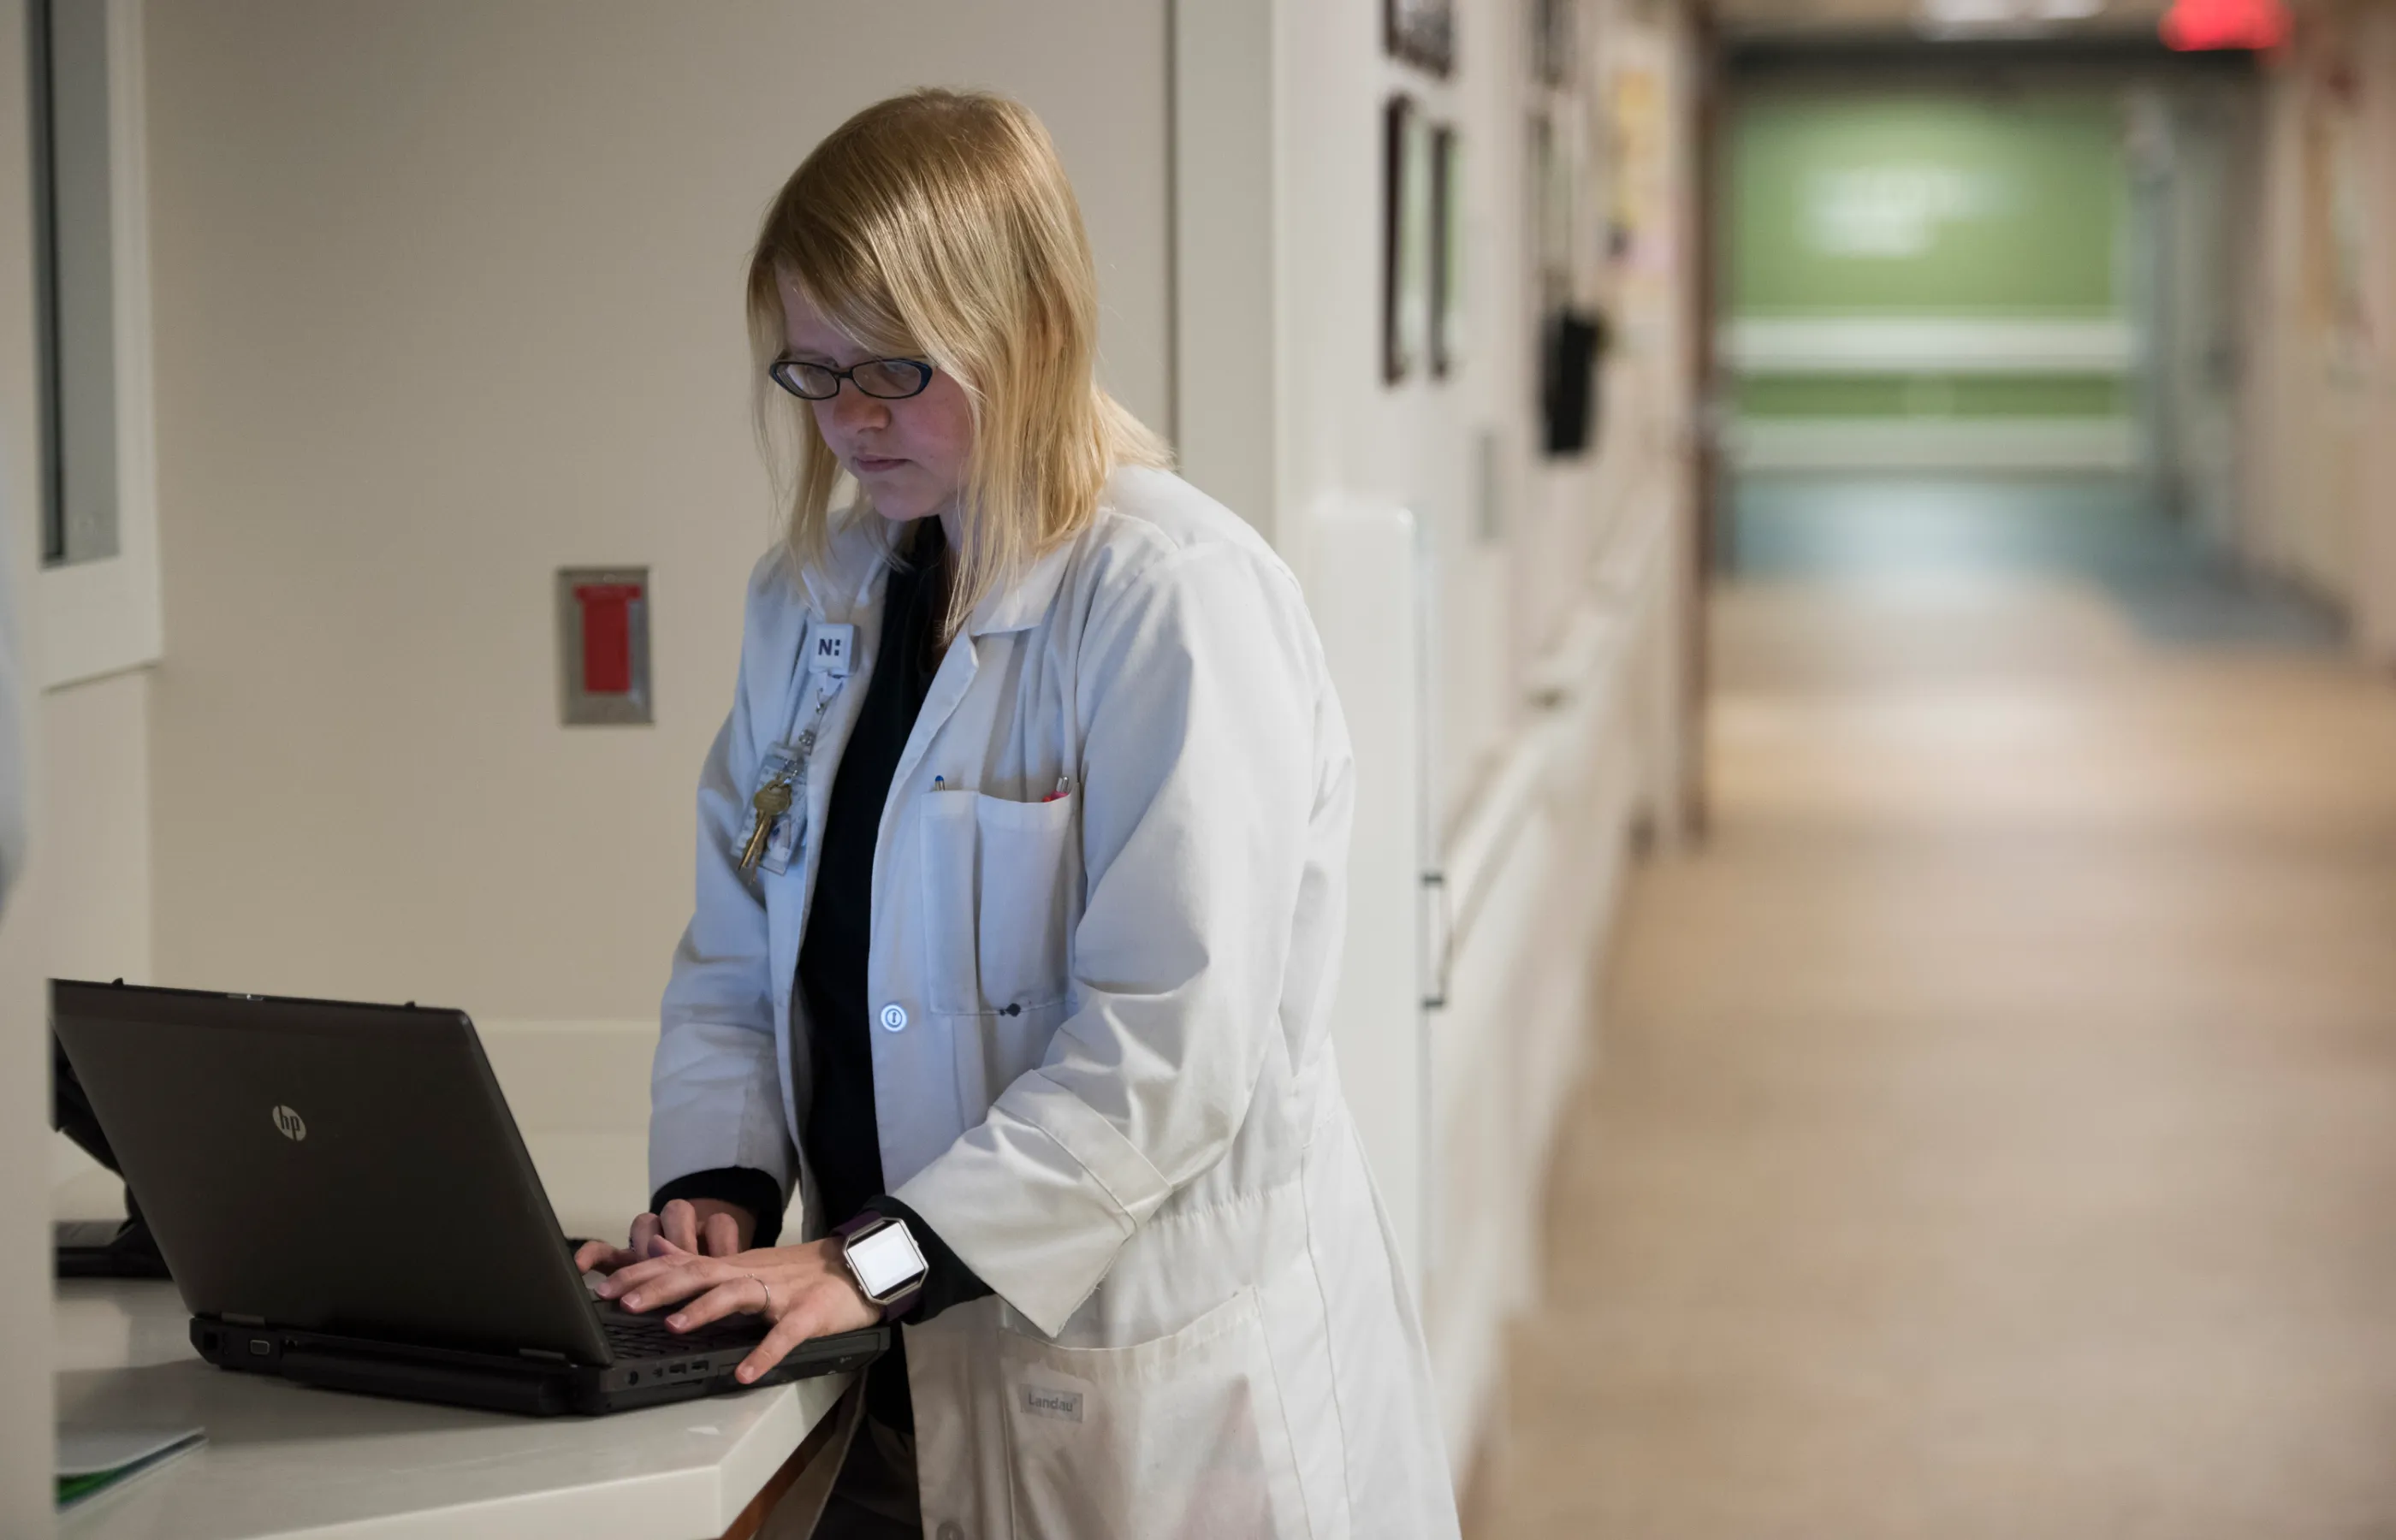 A Novant Health doctor is in the hallways of a hospital typing on a laptop.